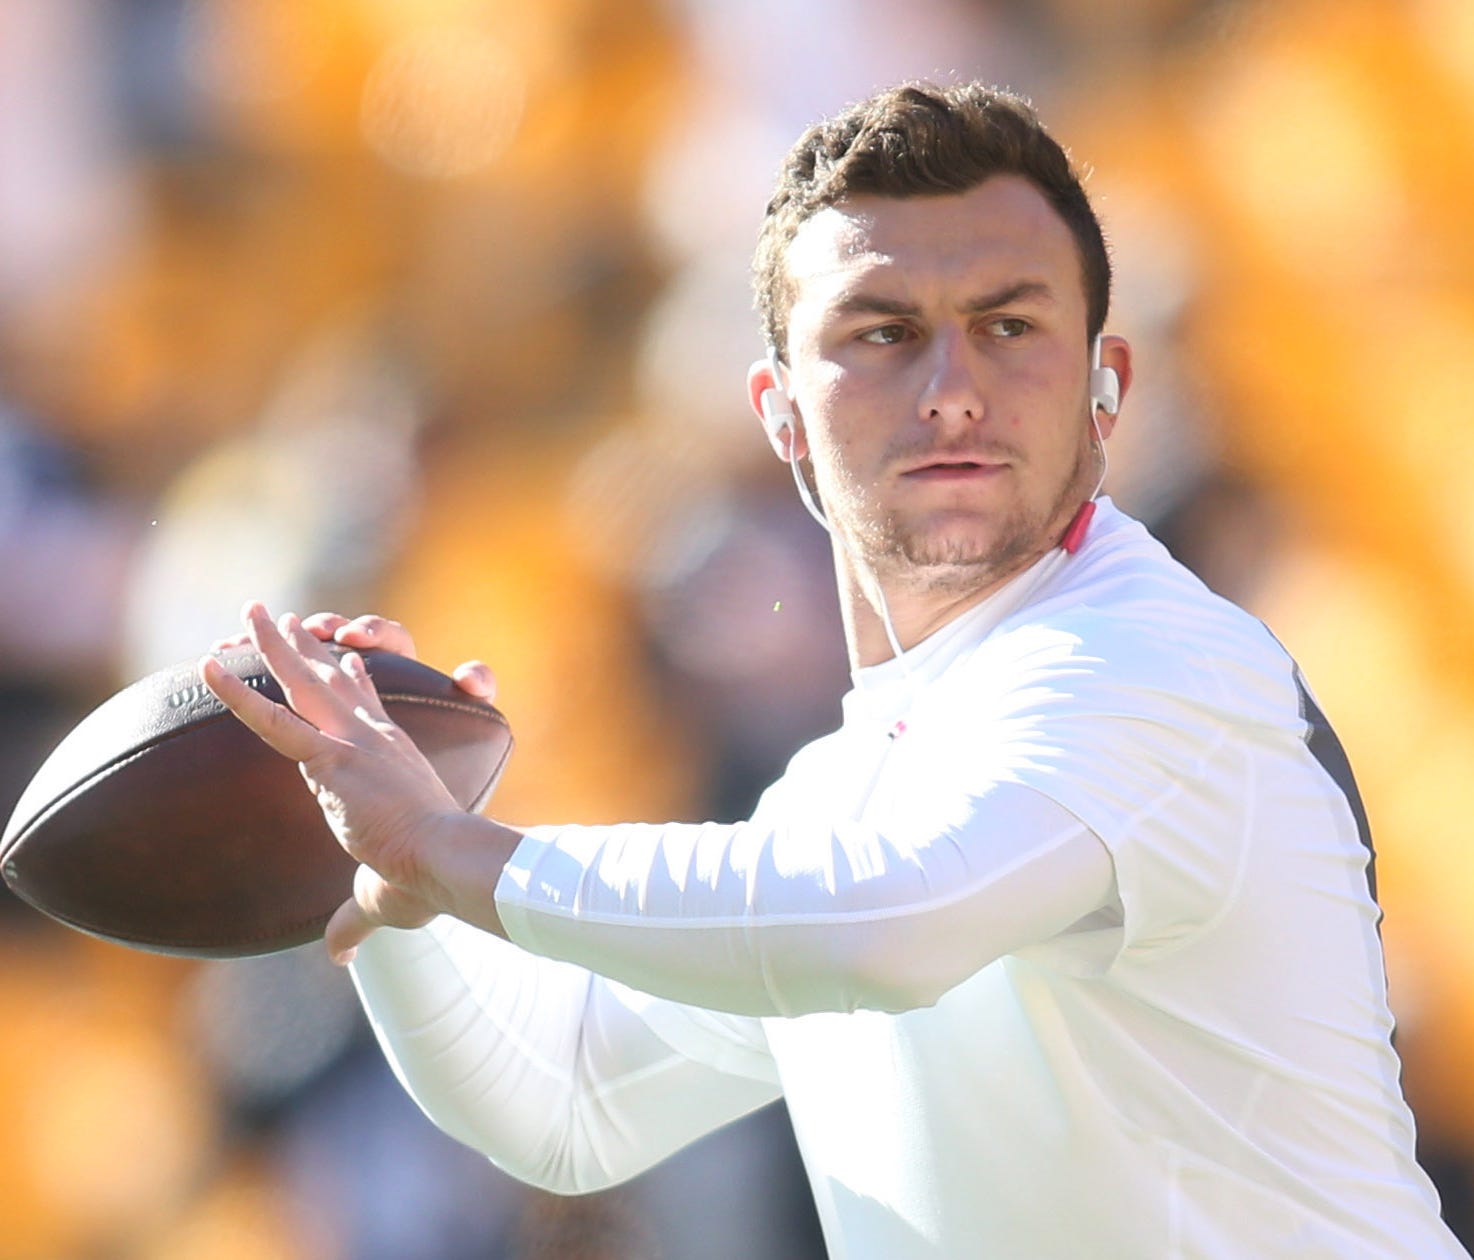 Cleveland Browns quarterback Johnny Manziel (2) warms up before playing the Pittsburgh Steelers at Heinz Field.